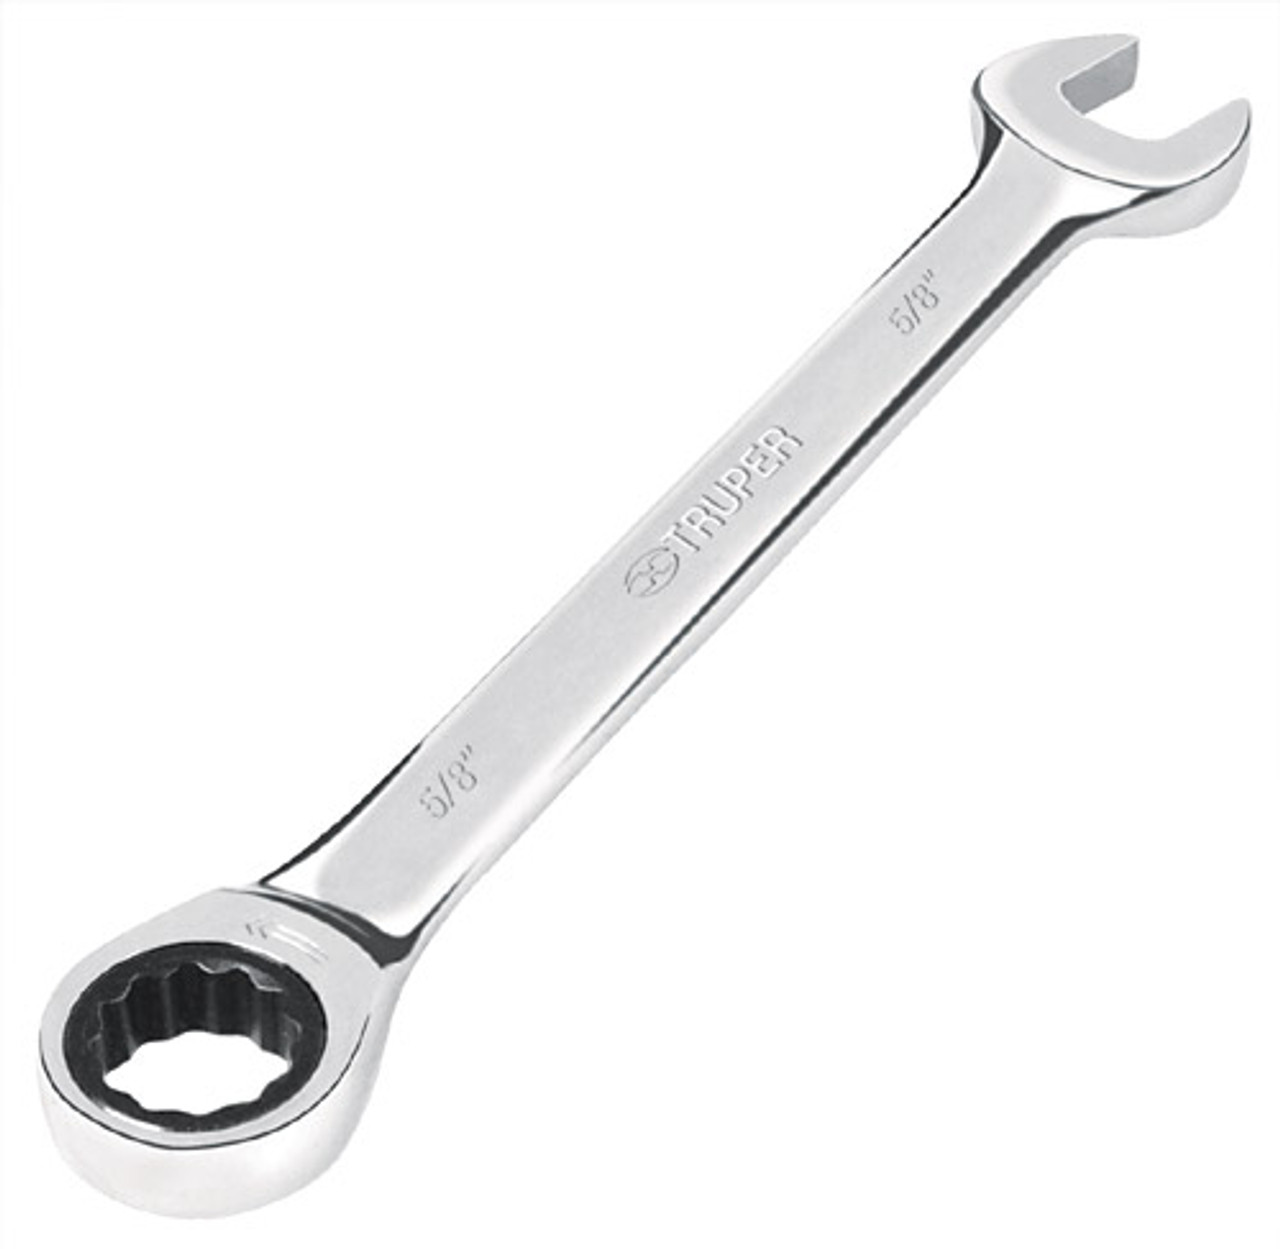 Truper 15mmx7.8" Combination Ratcheting Wrench #15747